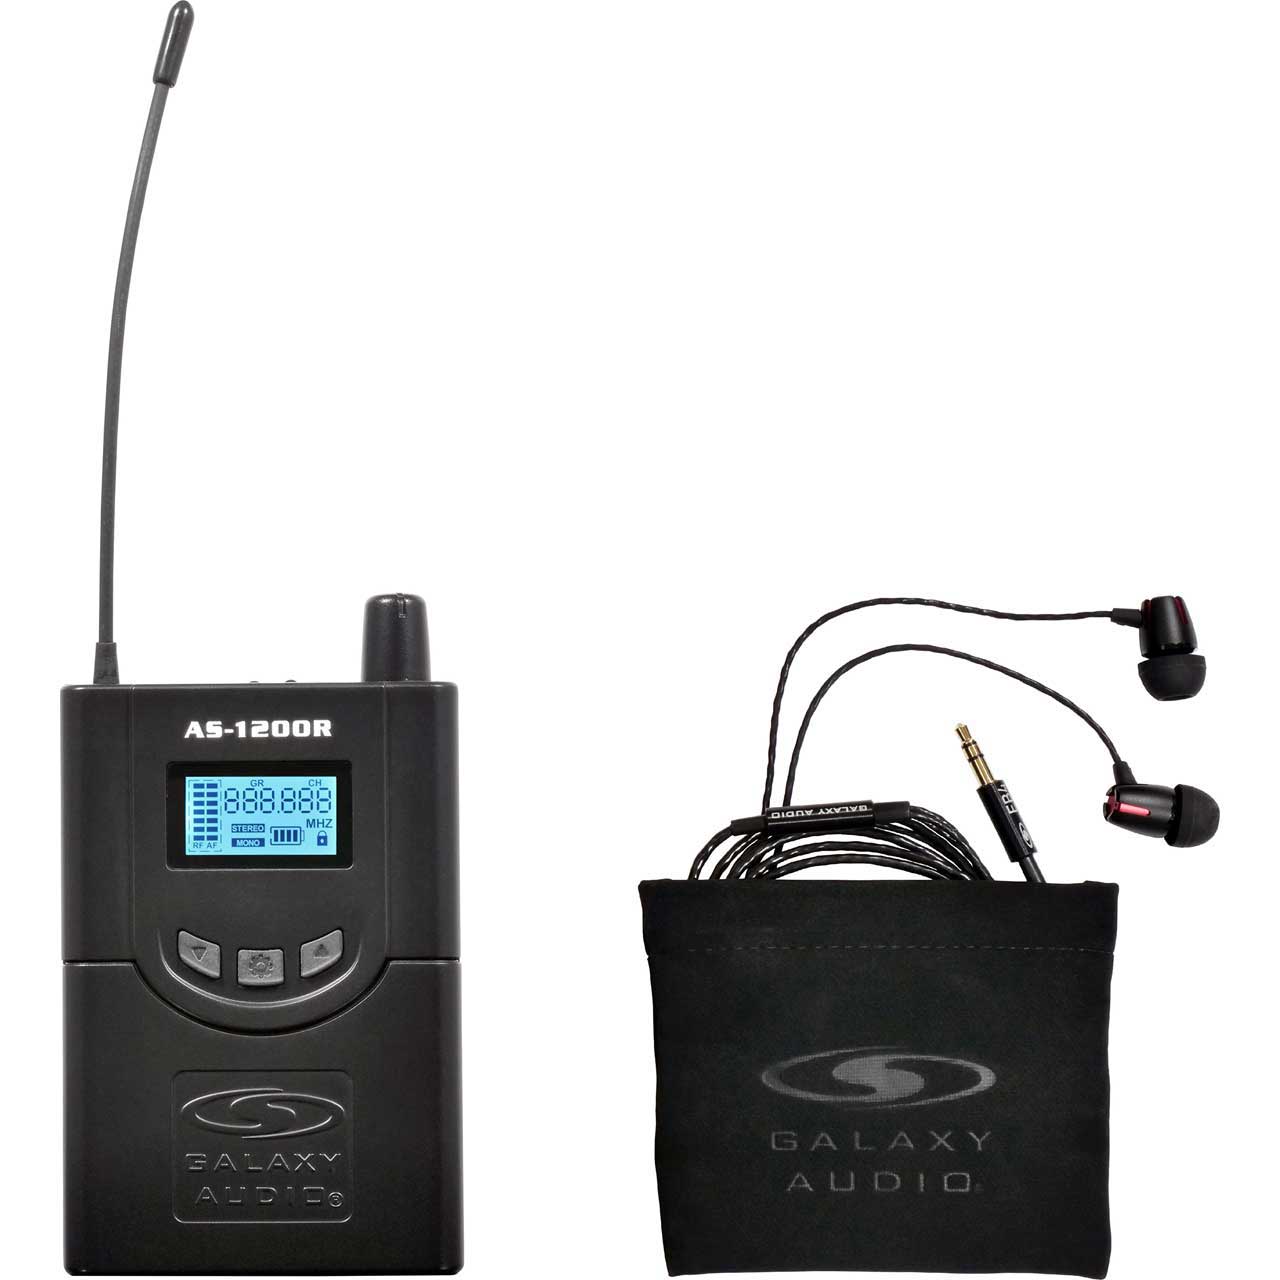 Galaxy Audio AS-1200RN 210 Channel Stereo Wireless Personal In-Ear Monitor Receiver with EB4 Earbuds - 518-542 MHz AS-1200RN